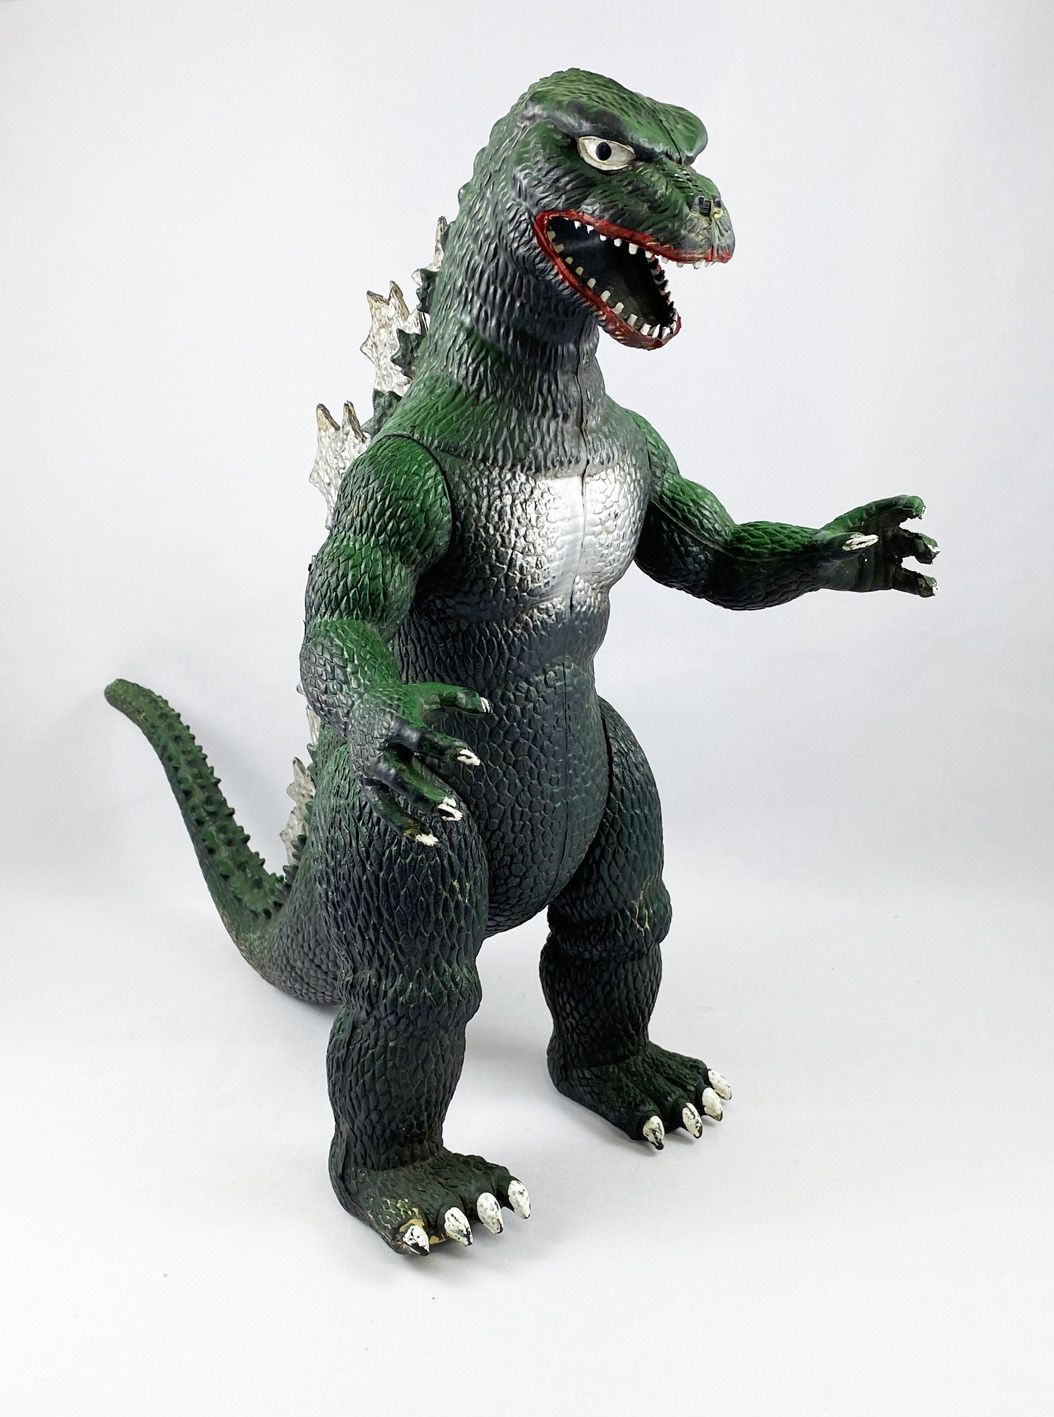 Details about   1985 Godzilla Spark E Imperial Toys Friction Toy 